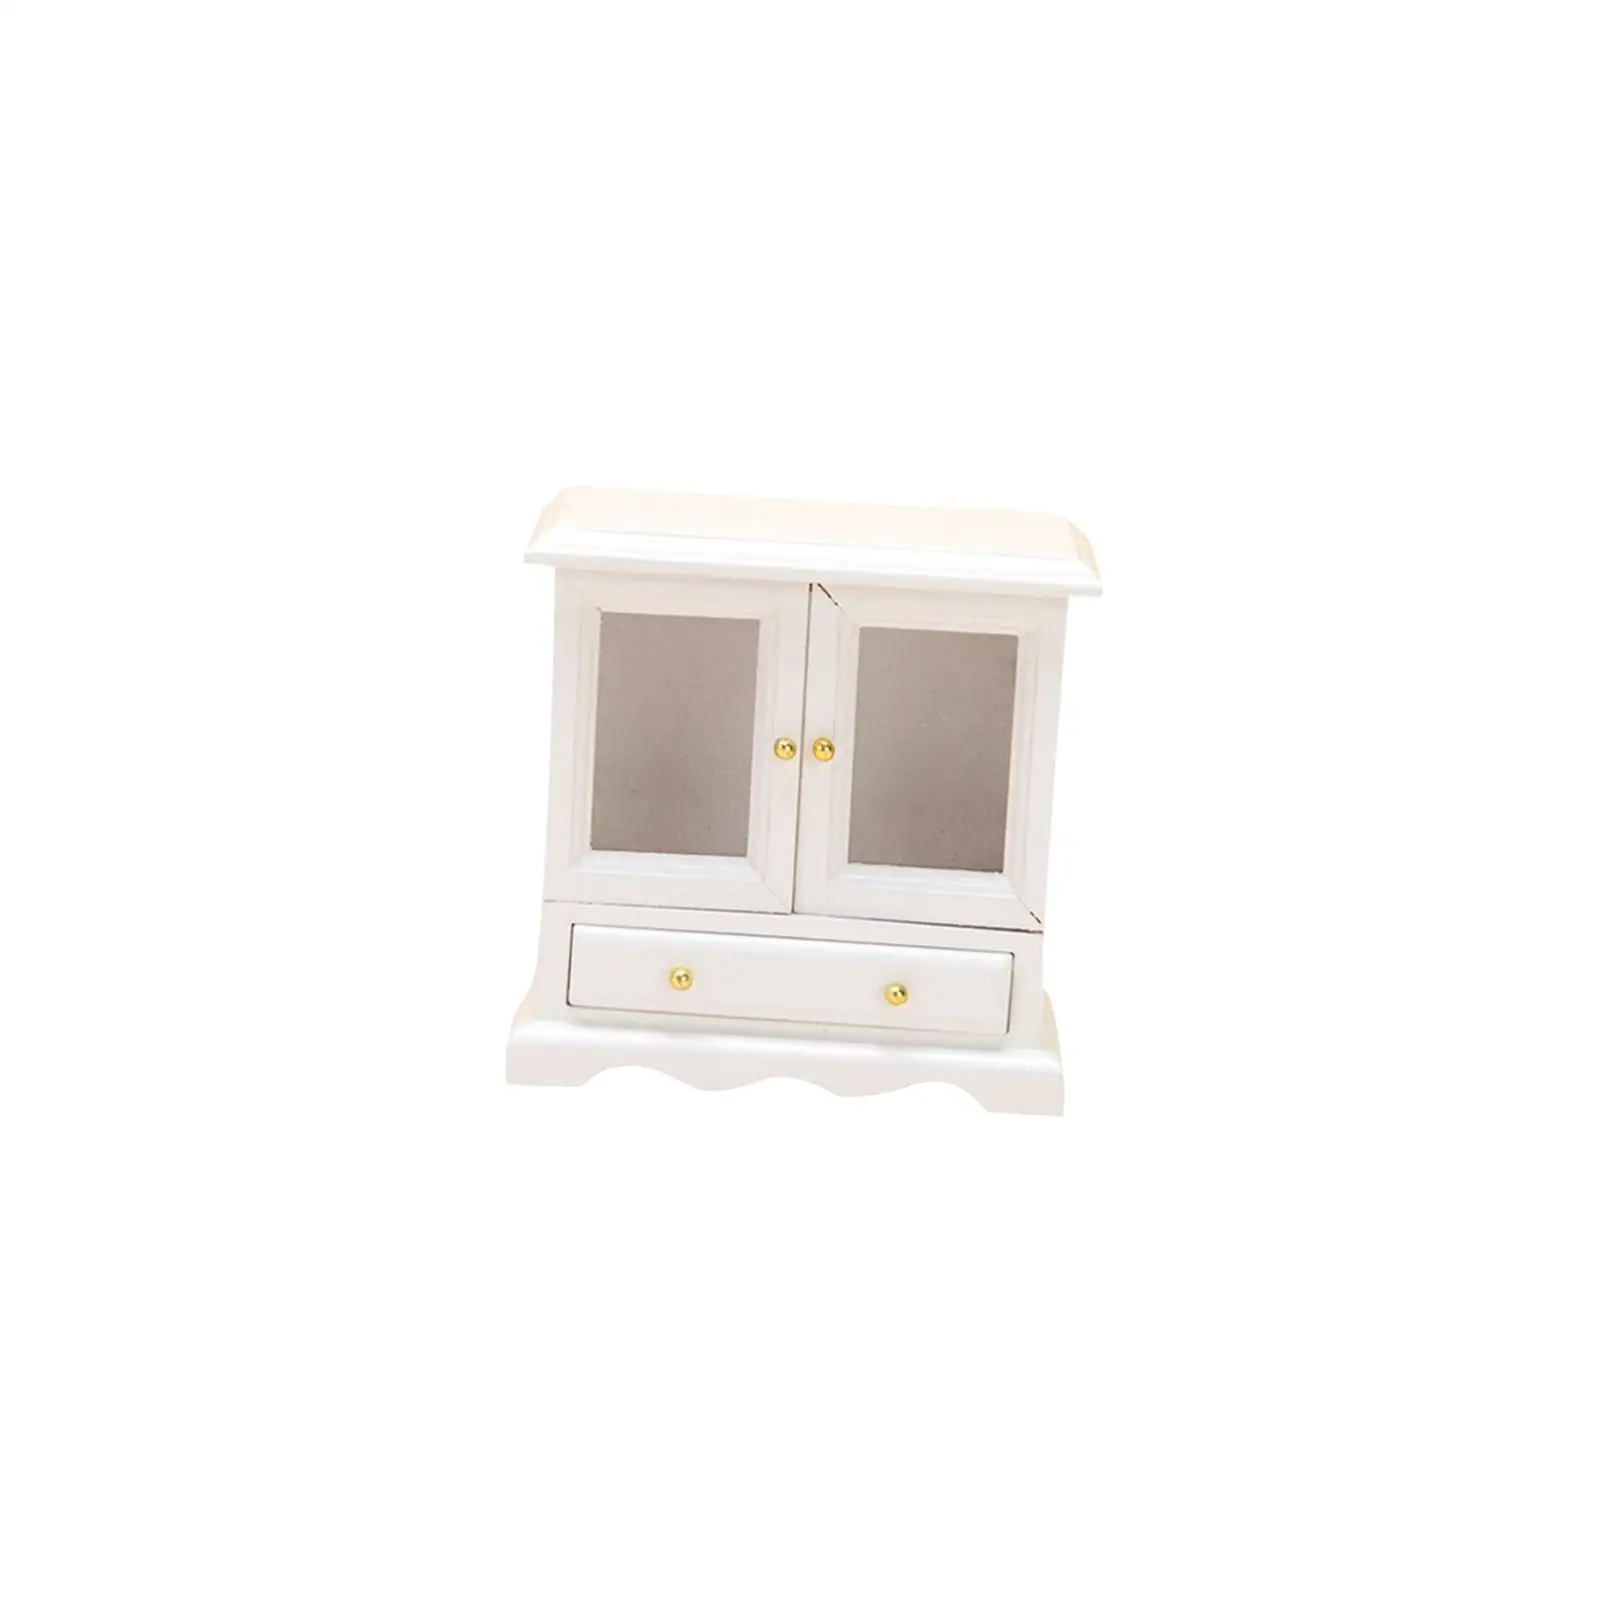 1/12 Scale Dollhouse Cupboard Cabinet Shelf Wooden Model Professional Smooth